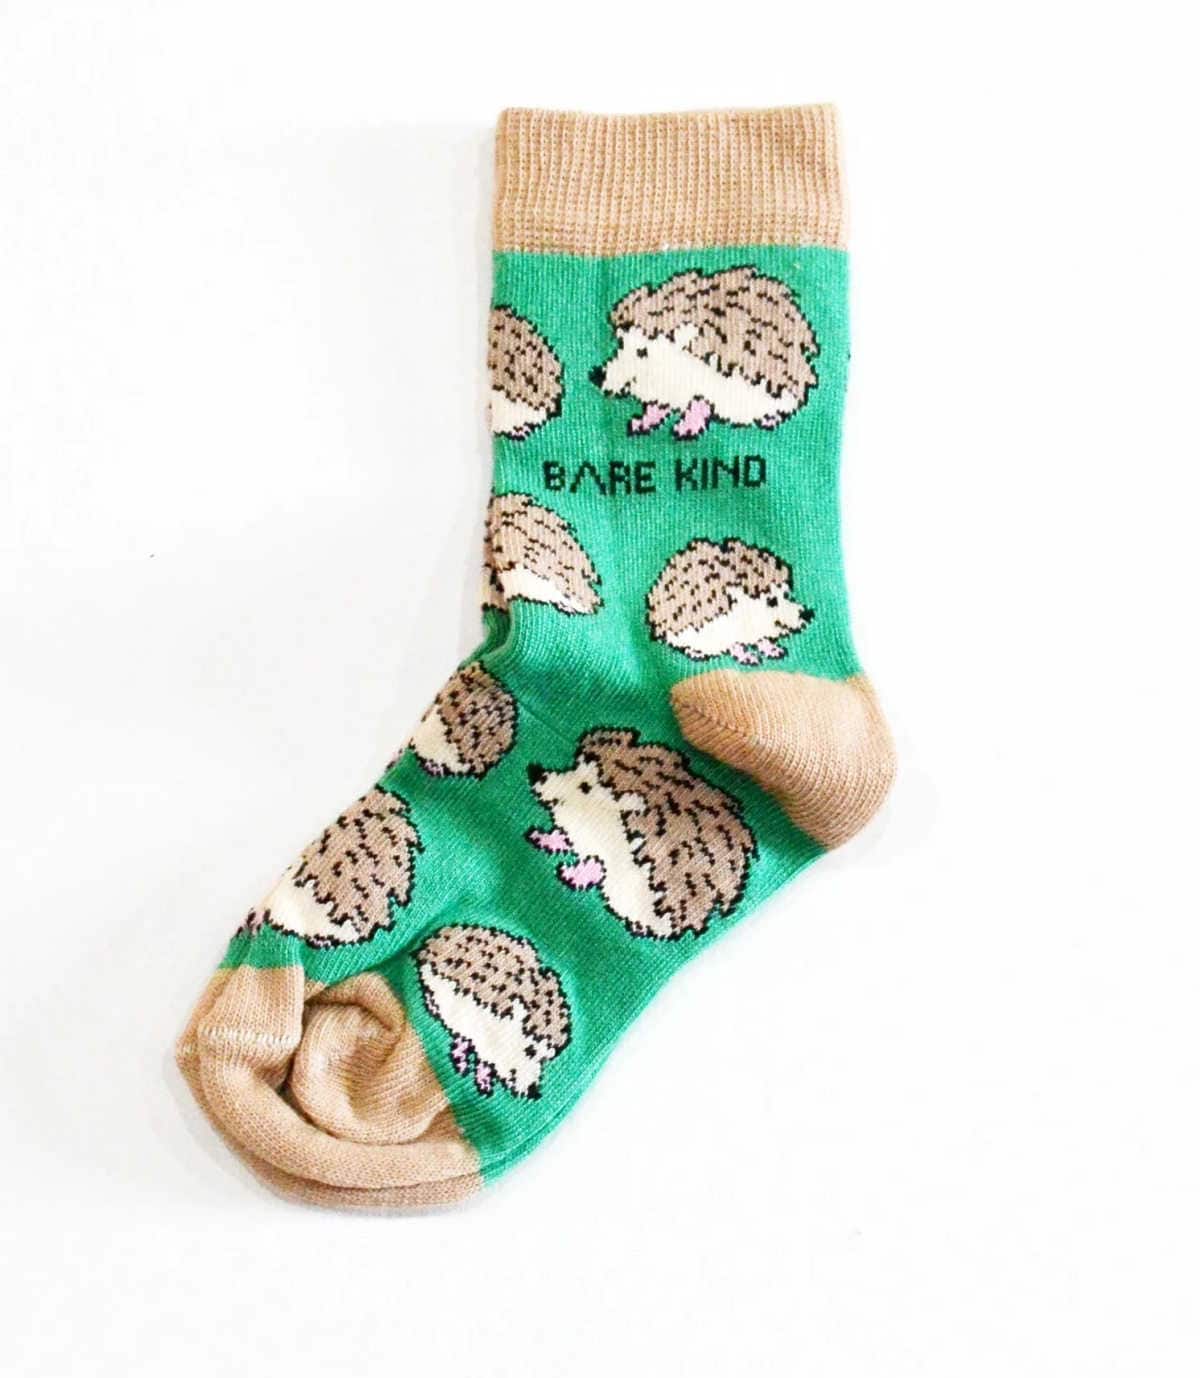 Green socks with brown hedgehogs on them